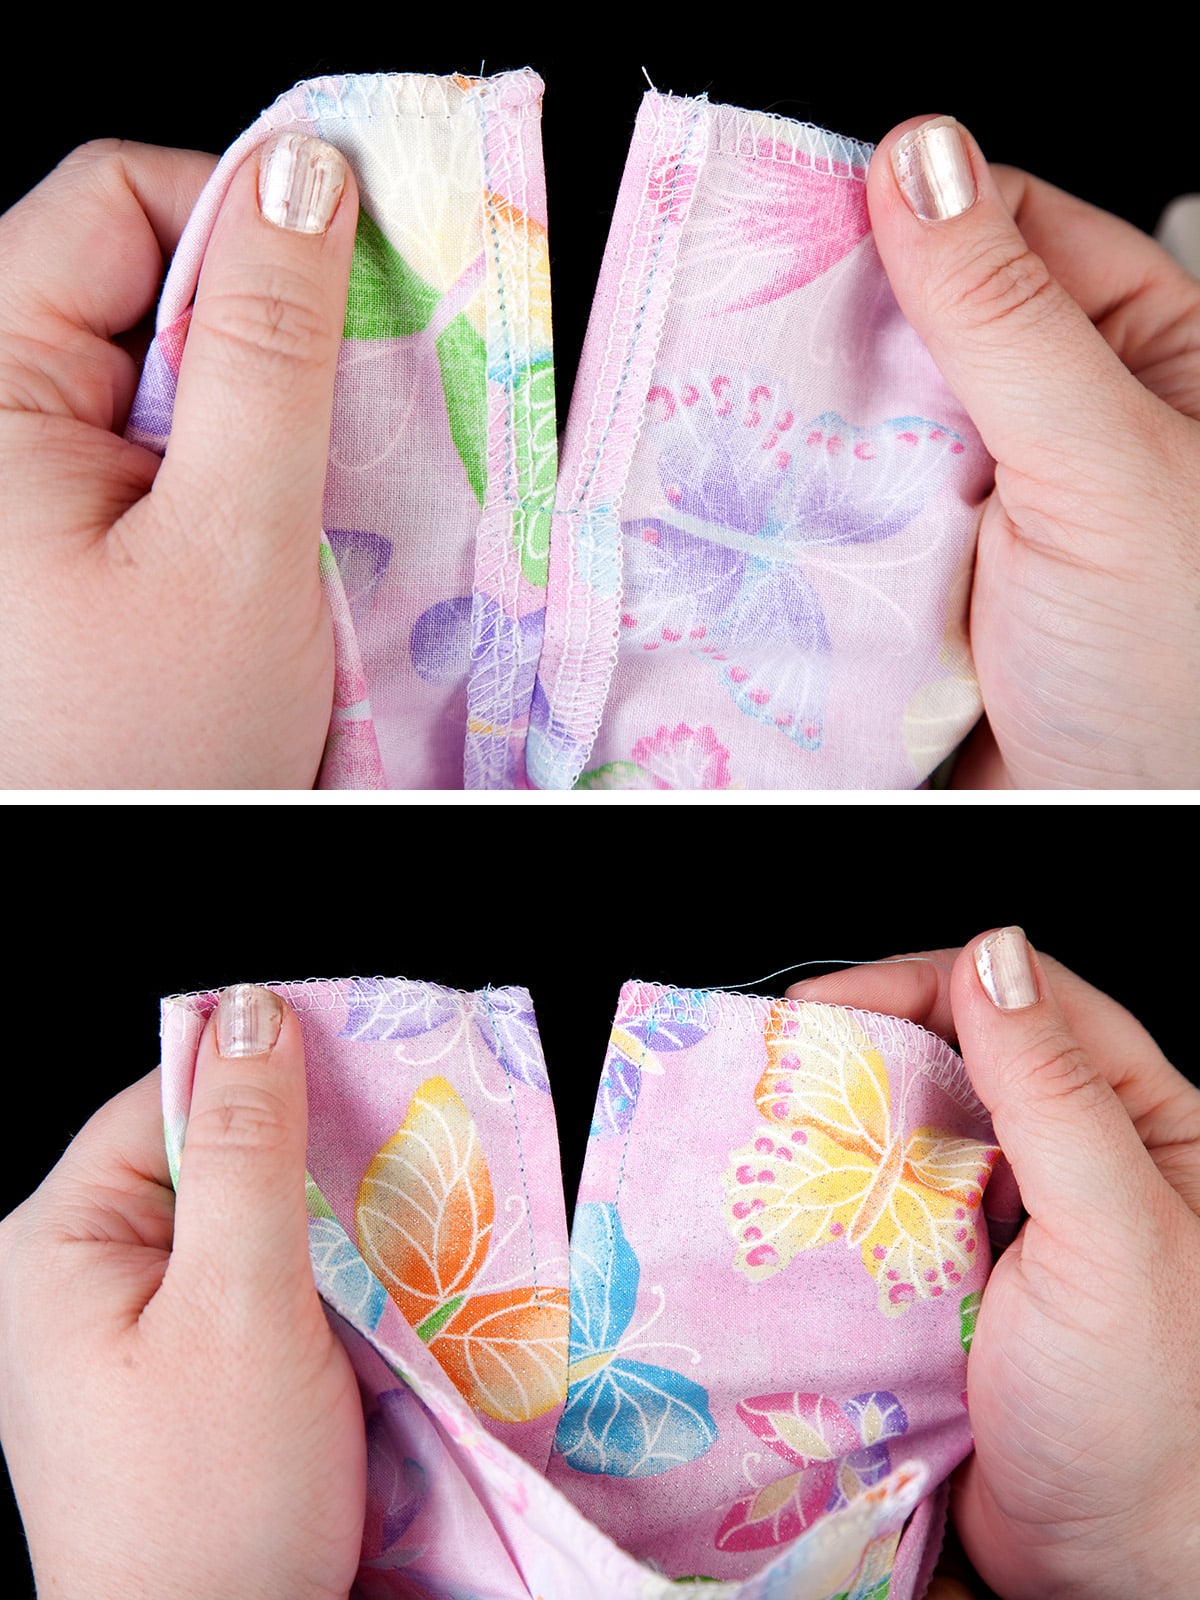 A two part compilation image, showing the inside and outside views of a seam sewn into light purple butterfly print fabric.